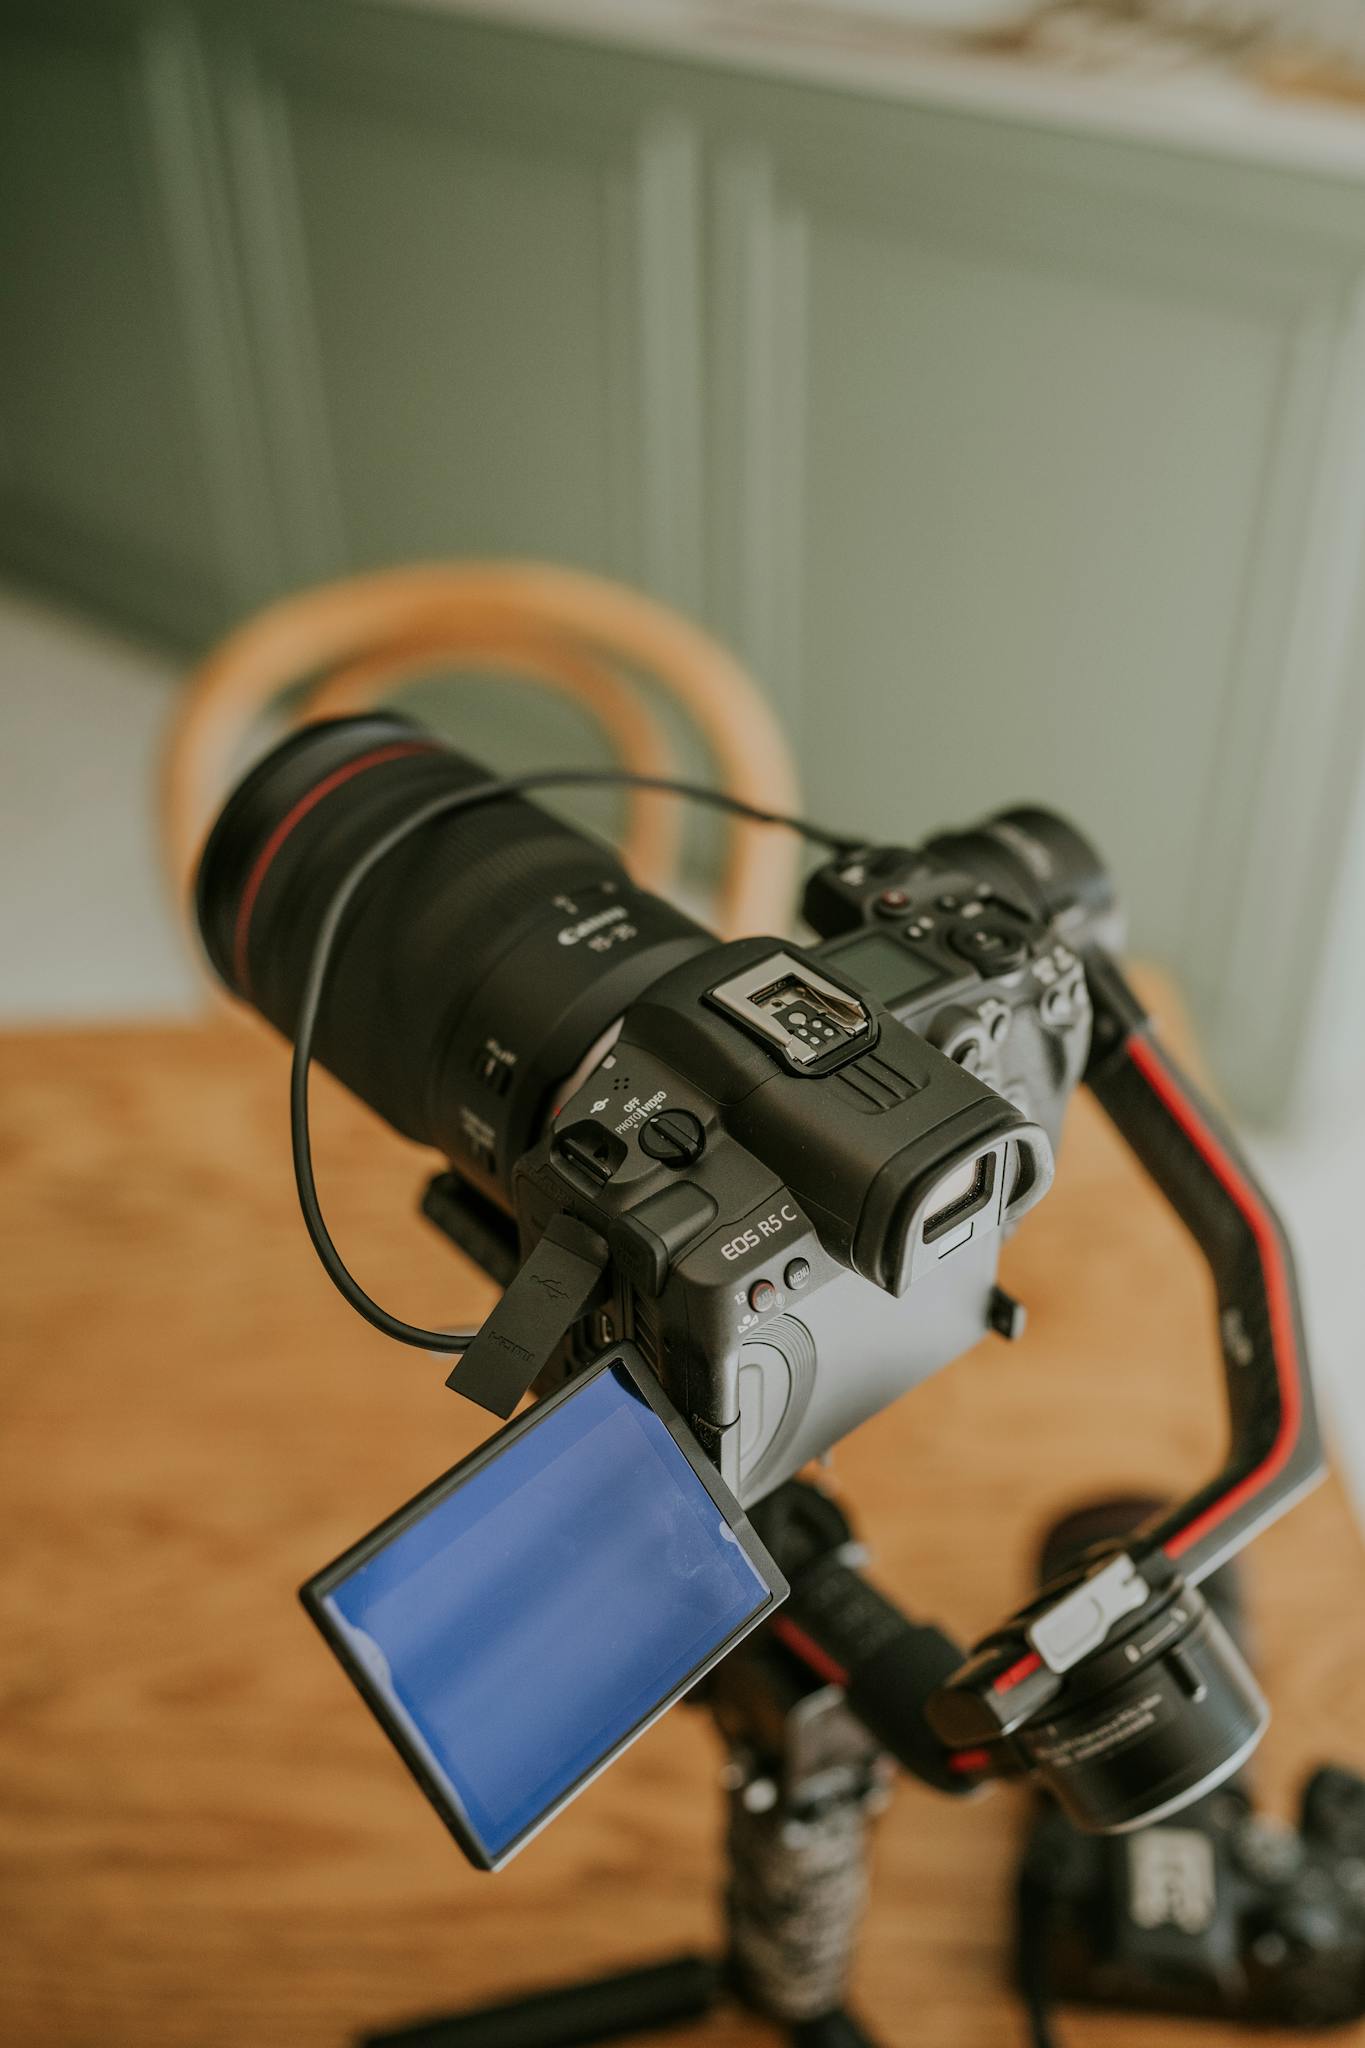 A camera on a tripod with a monitor on it